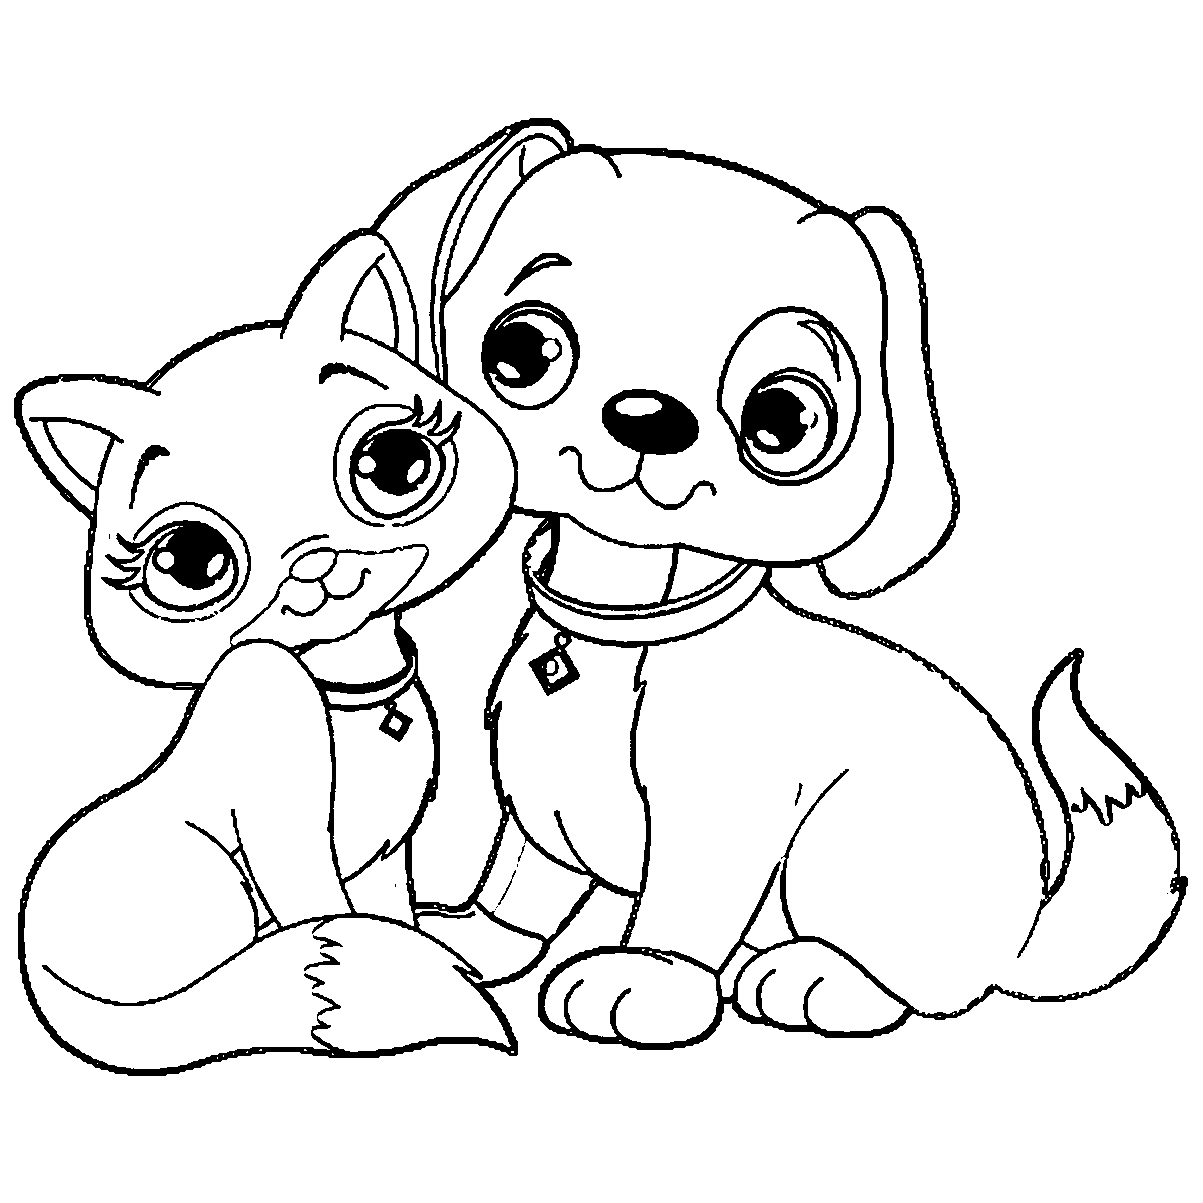 Puppy Outline Coloring Page - Coloring Home